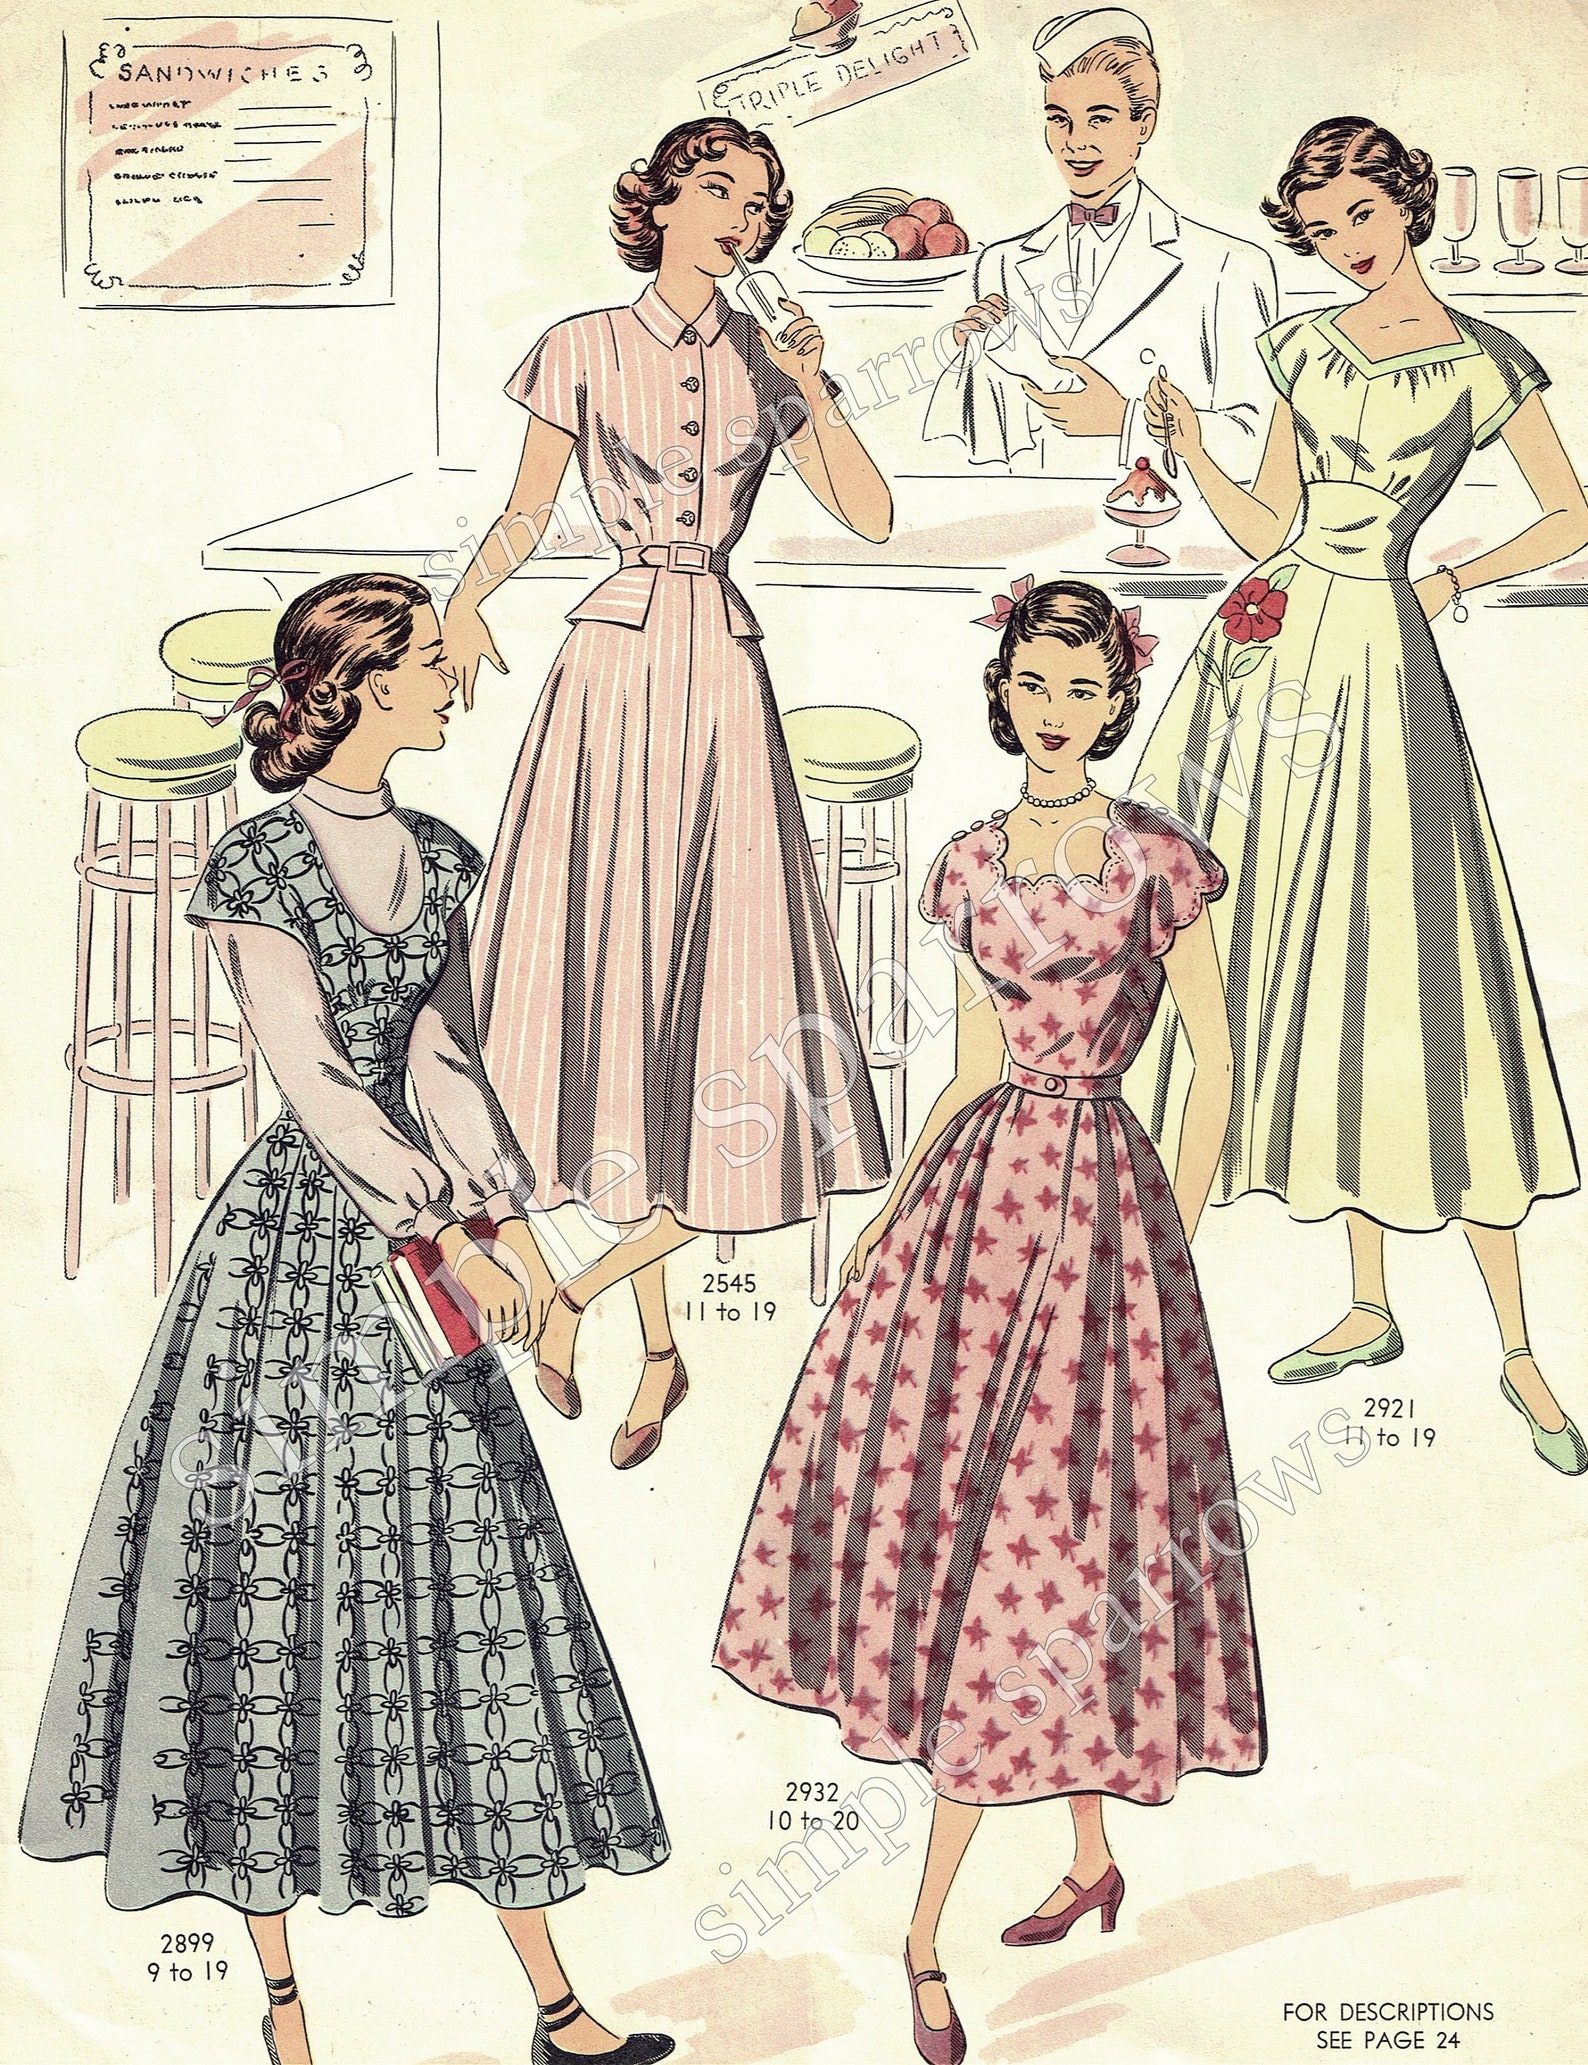 Vintage 1940s Fashion Ad INSTANT DOWNLOAD Printable - Etsy